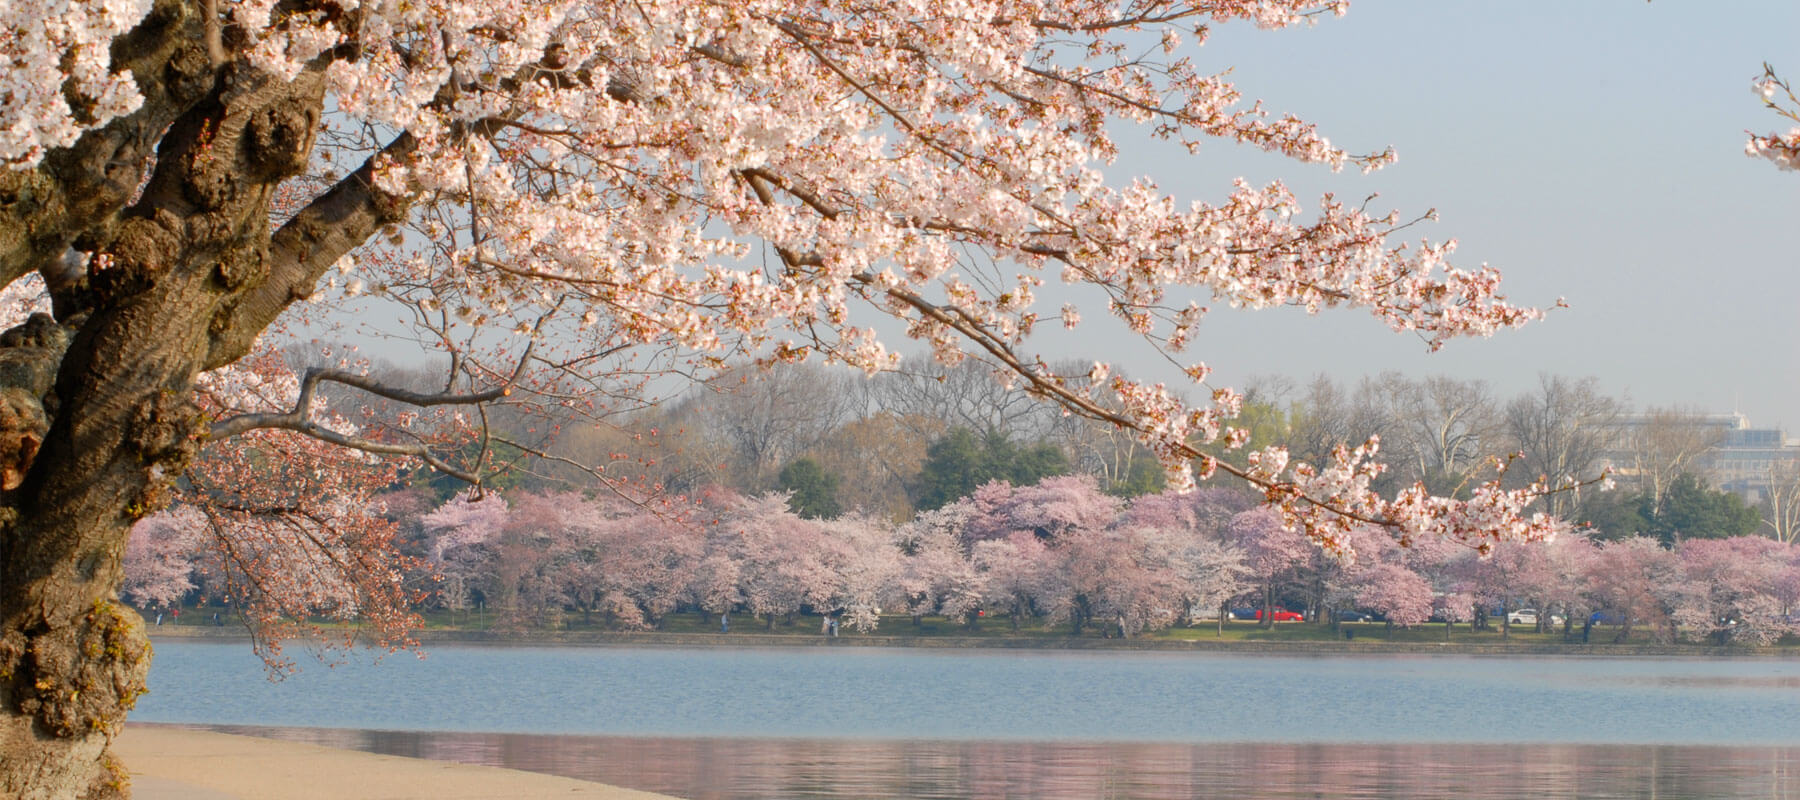 The Best National Cherry Blossom Festival Events in Washington, DC